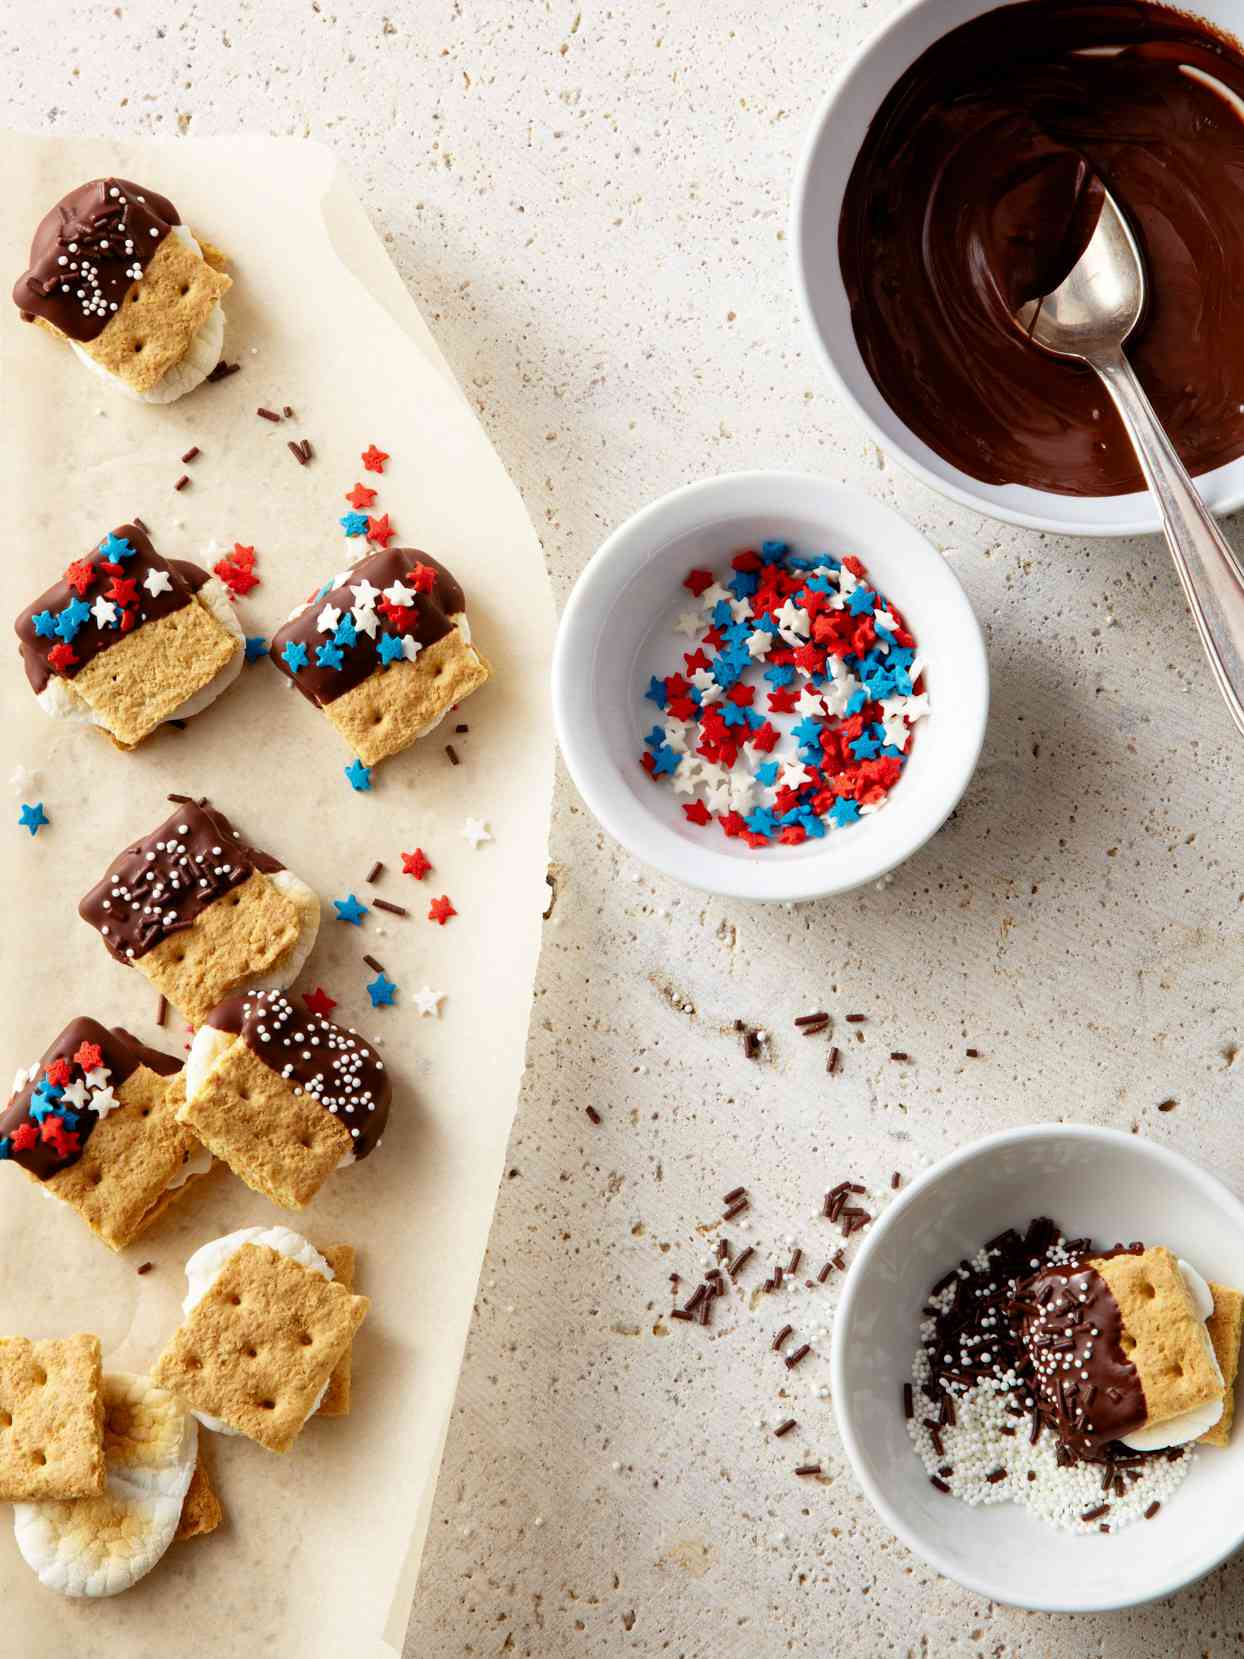 Mini S’mores with red, white, and blue stars